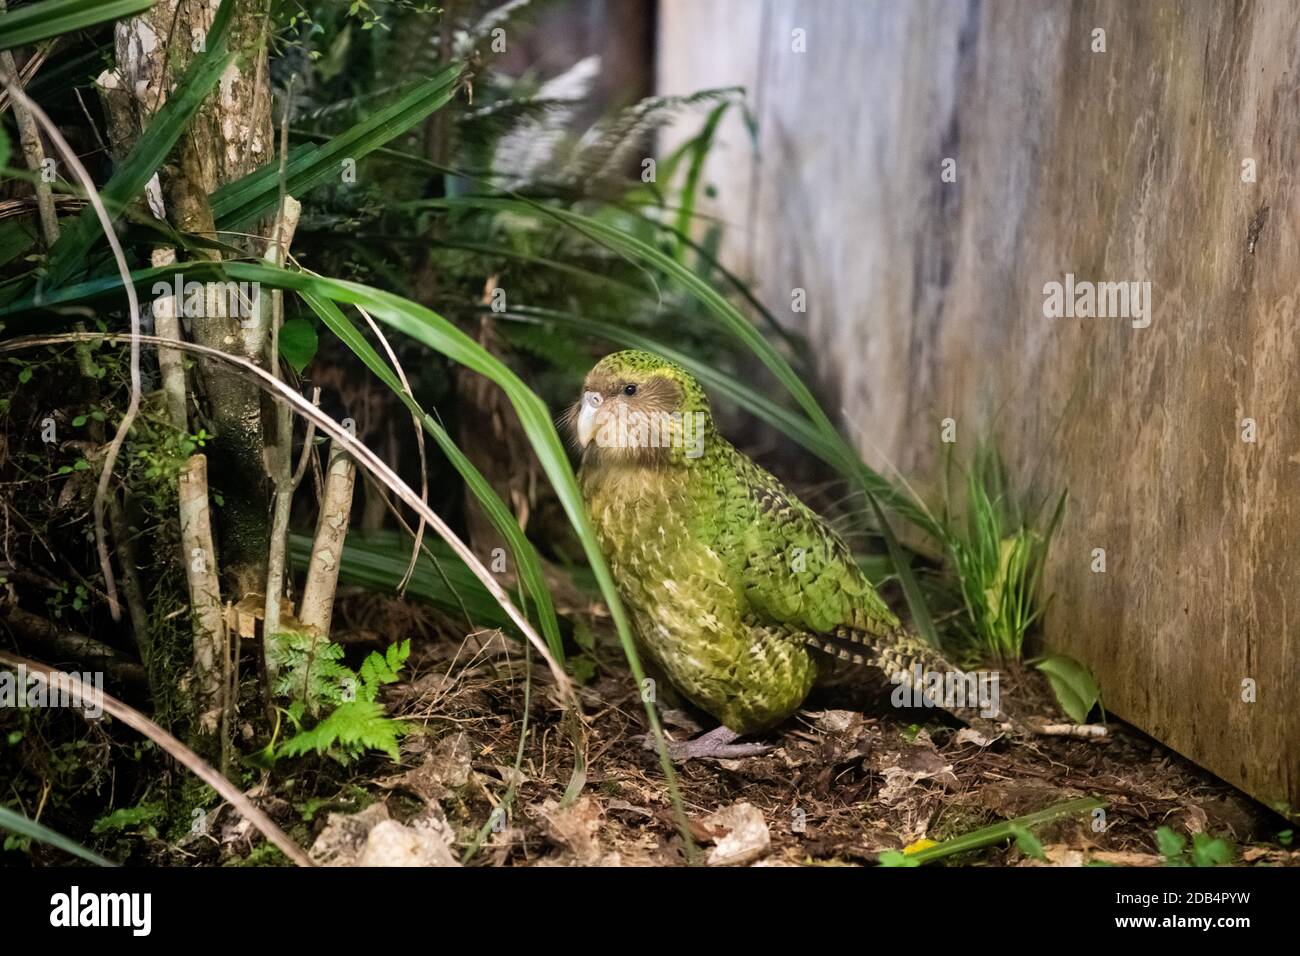 Dunedin. 13th Sep, 2018. File photo taken on Sept. 13, 2018 shows a Kakapo named Sirocco exhibited at the Orokonui Ecosanctuary in Dunedin, New Zealand. Critically endangered native bird Kakapo has won New Zealand Bird of the Year 2020 for an unprecedented second time, event organizer Forest and Bird announced here on Monday. This annual competition is held by Forest and Bird, an independent conservation organization, to raise people's awareness of natural birds. Credit: Yang Liu/Xinhua/Alamy Live News Stock Photo